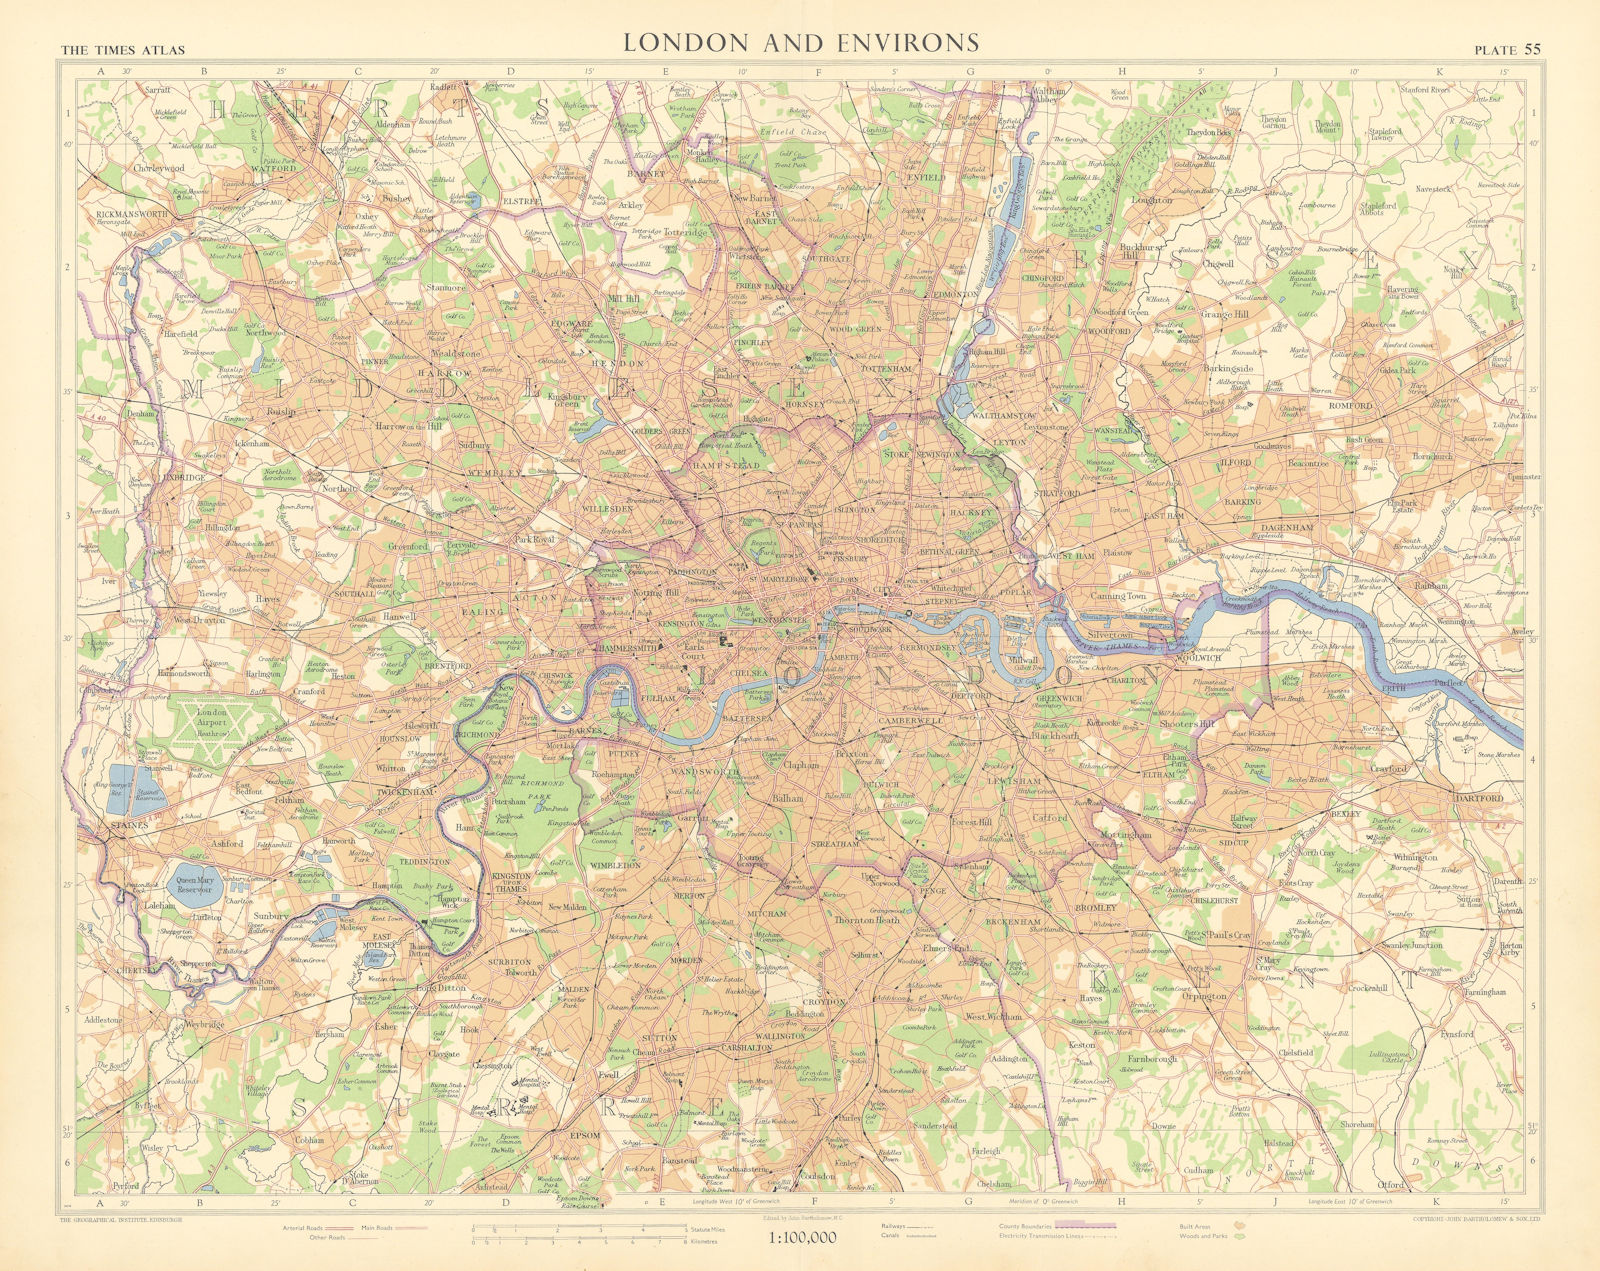 Associate Product Greater London. Railways canals electricity transmission lines. TIMES 1955 map